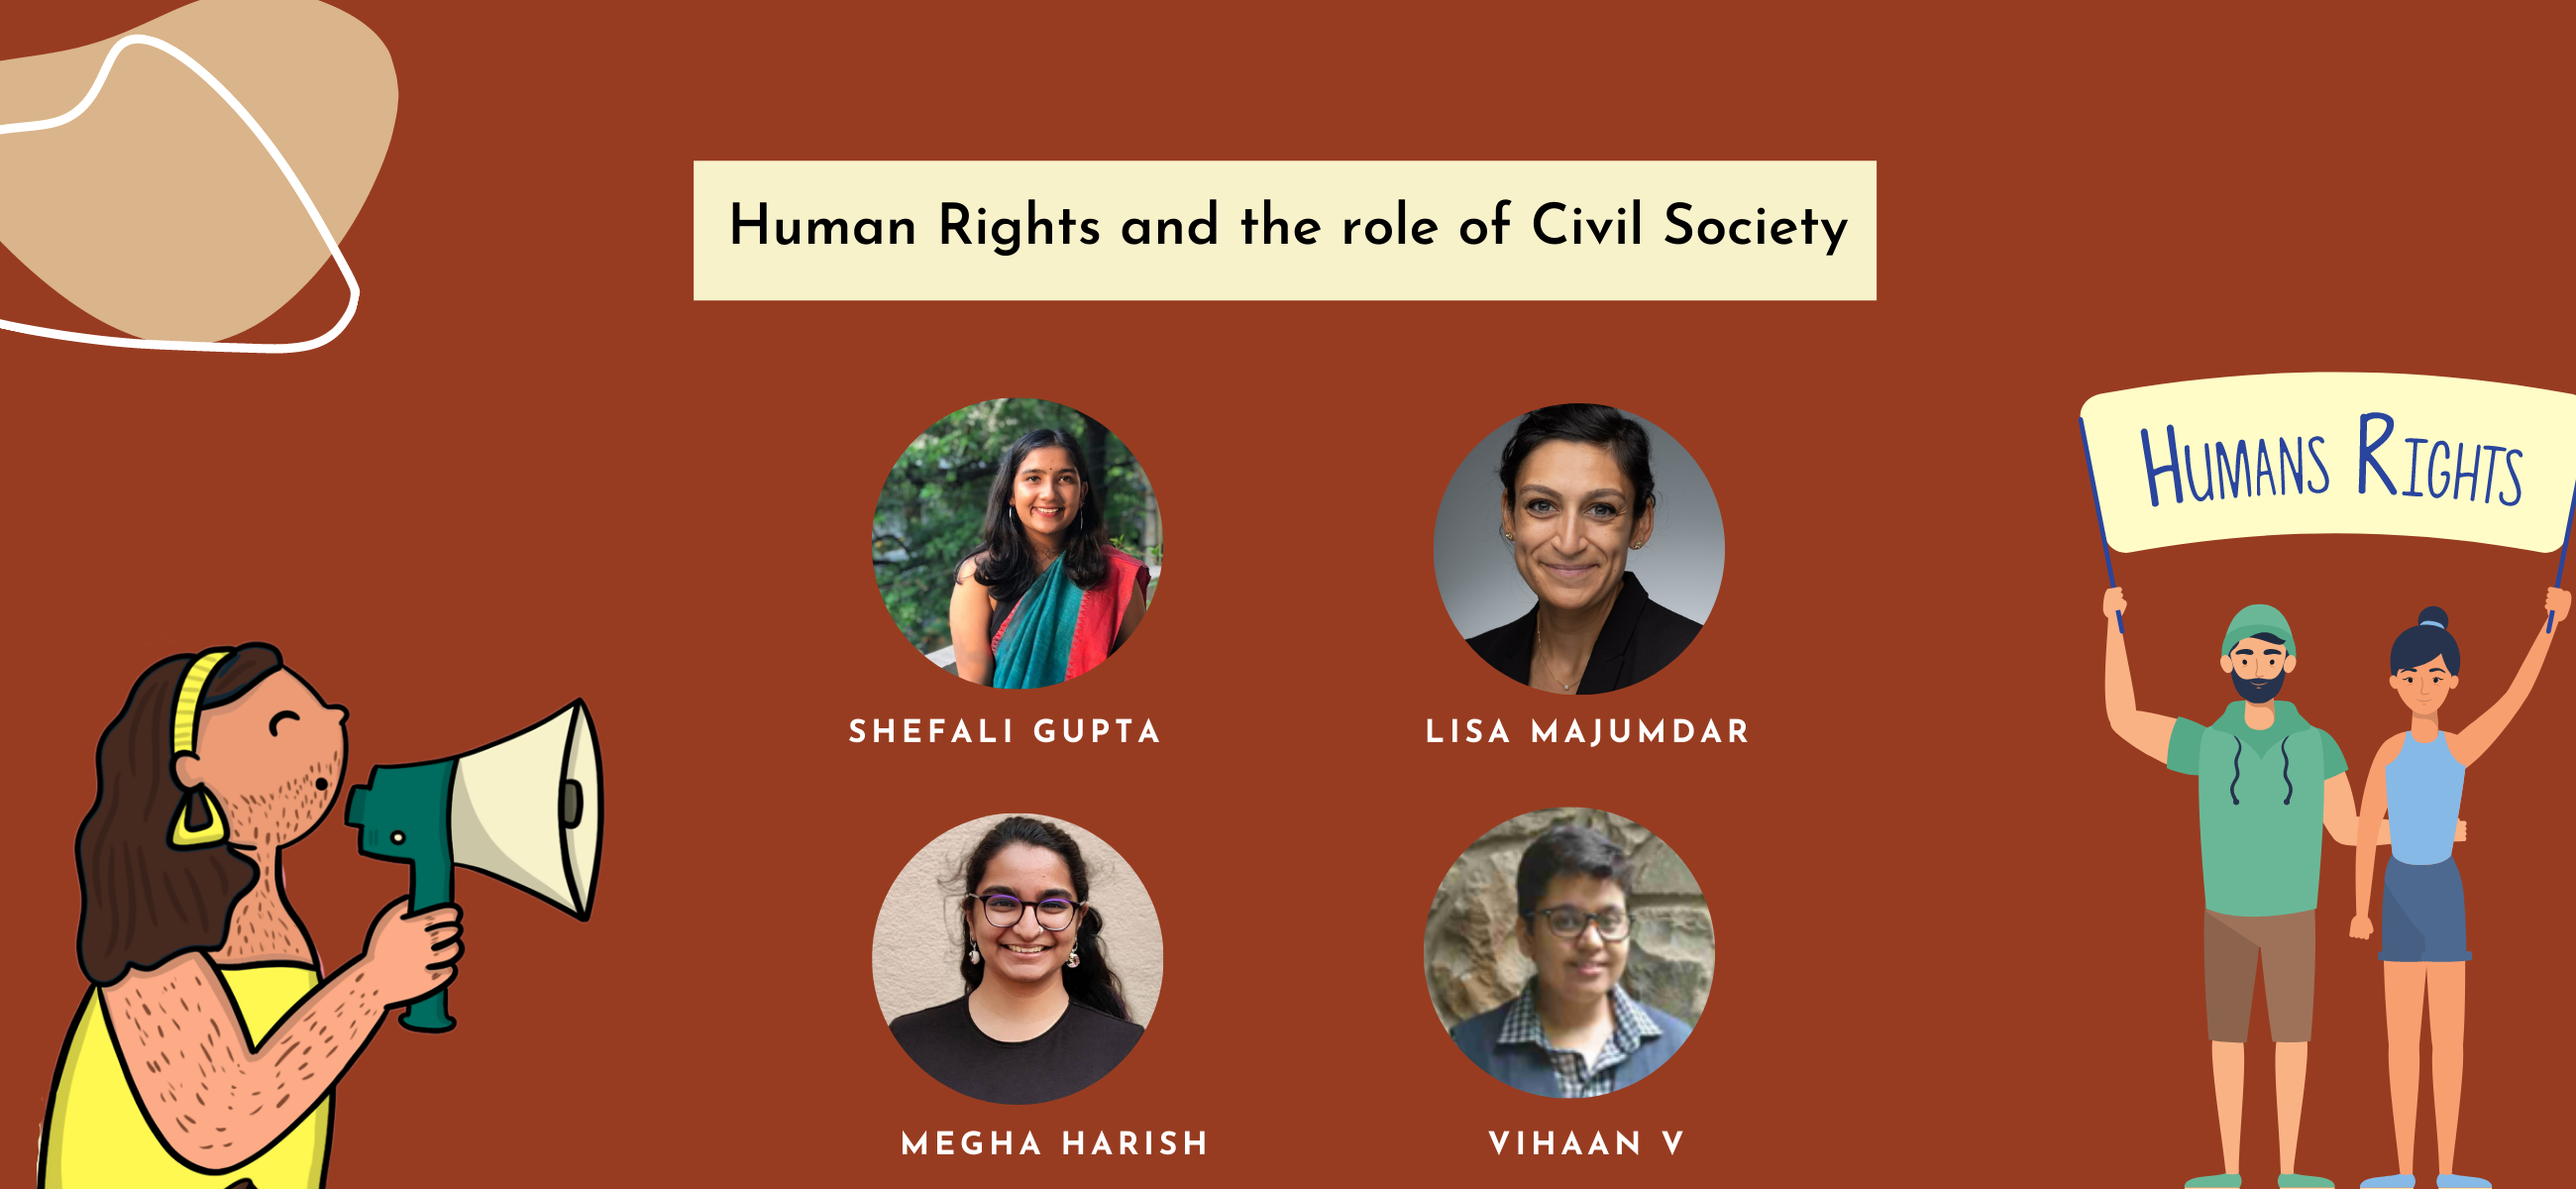 Human Rights and the Role of Civil Society